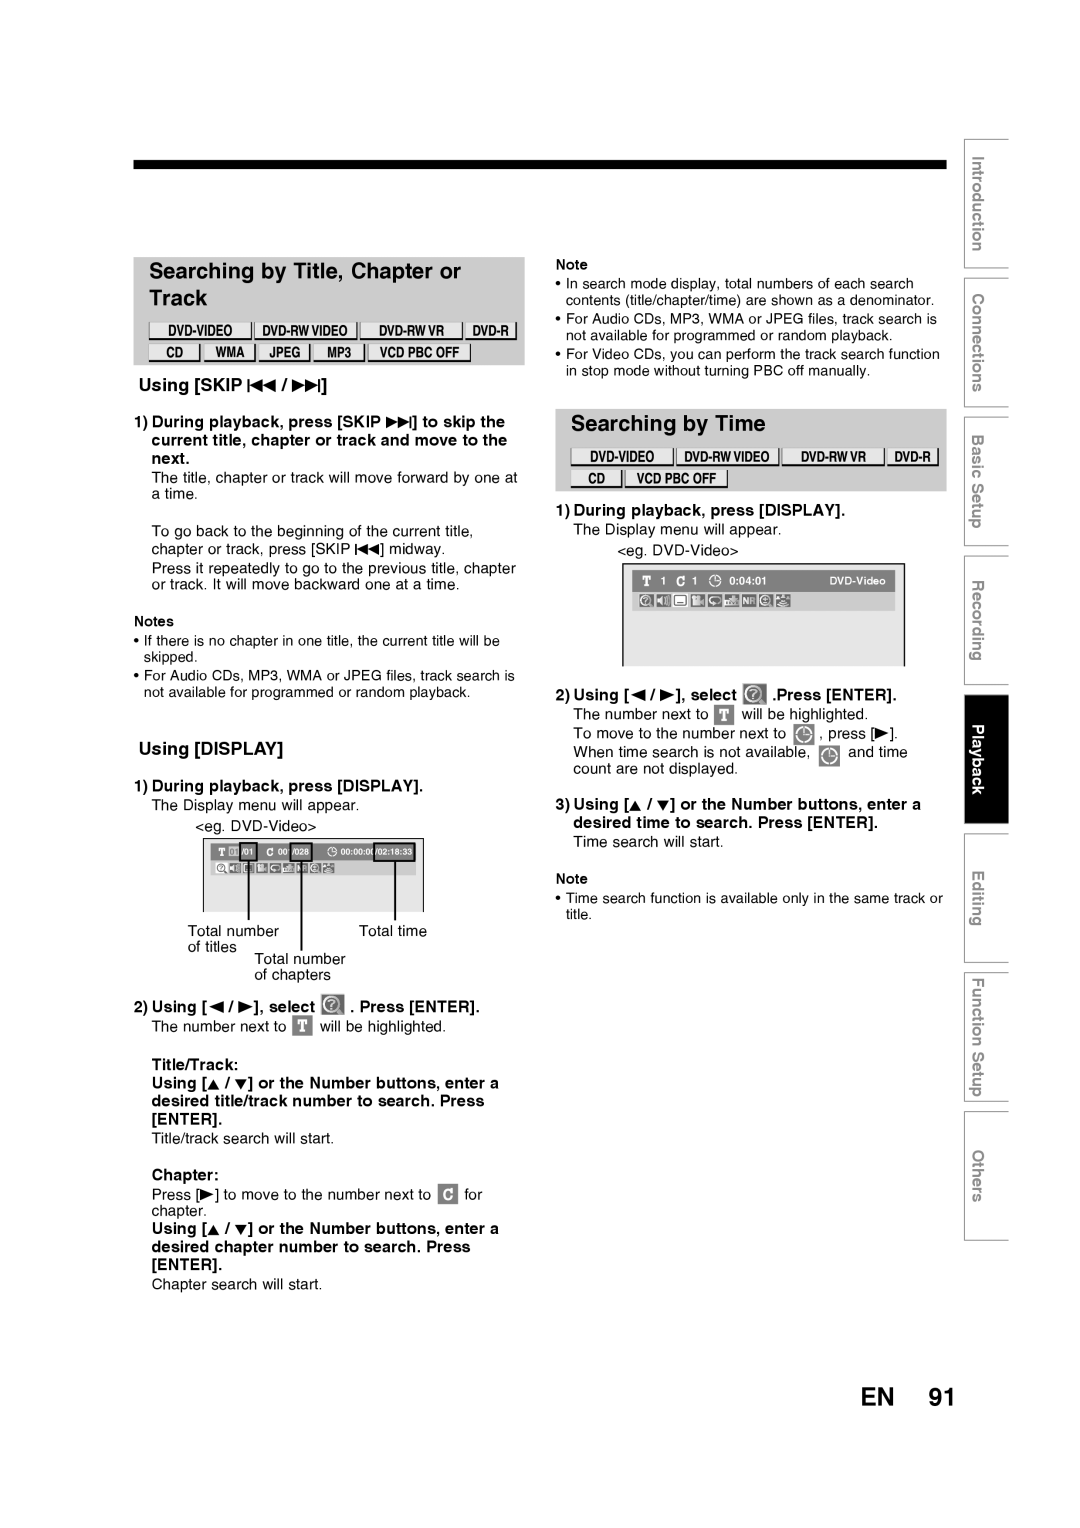 Toshiba D-RW2SU/D-RW2SC manual Searching by Title, Chapter or Track, Searching by Time, Using SKIP H / G, Using DISPLAY 